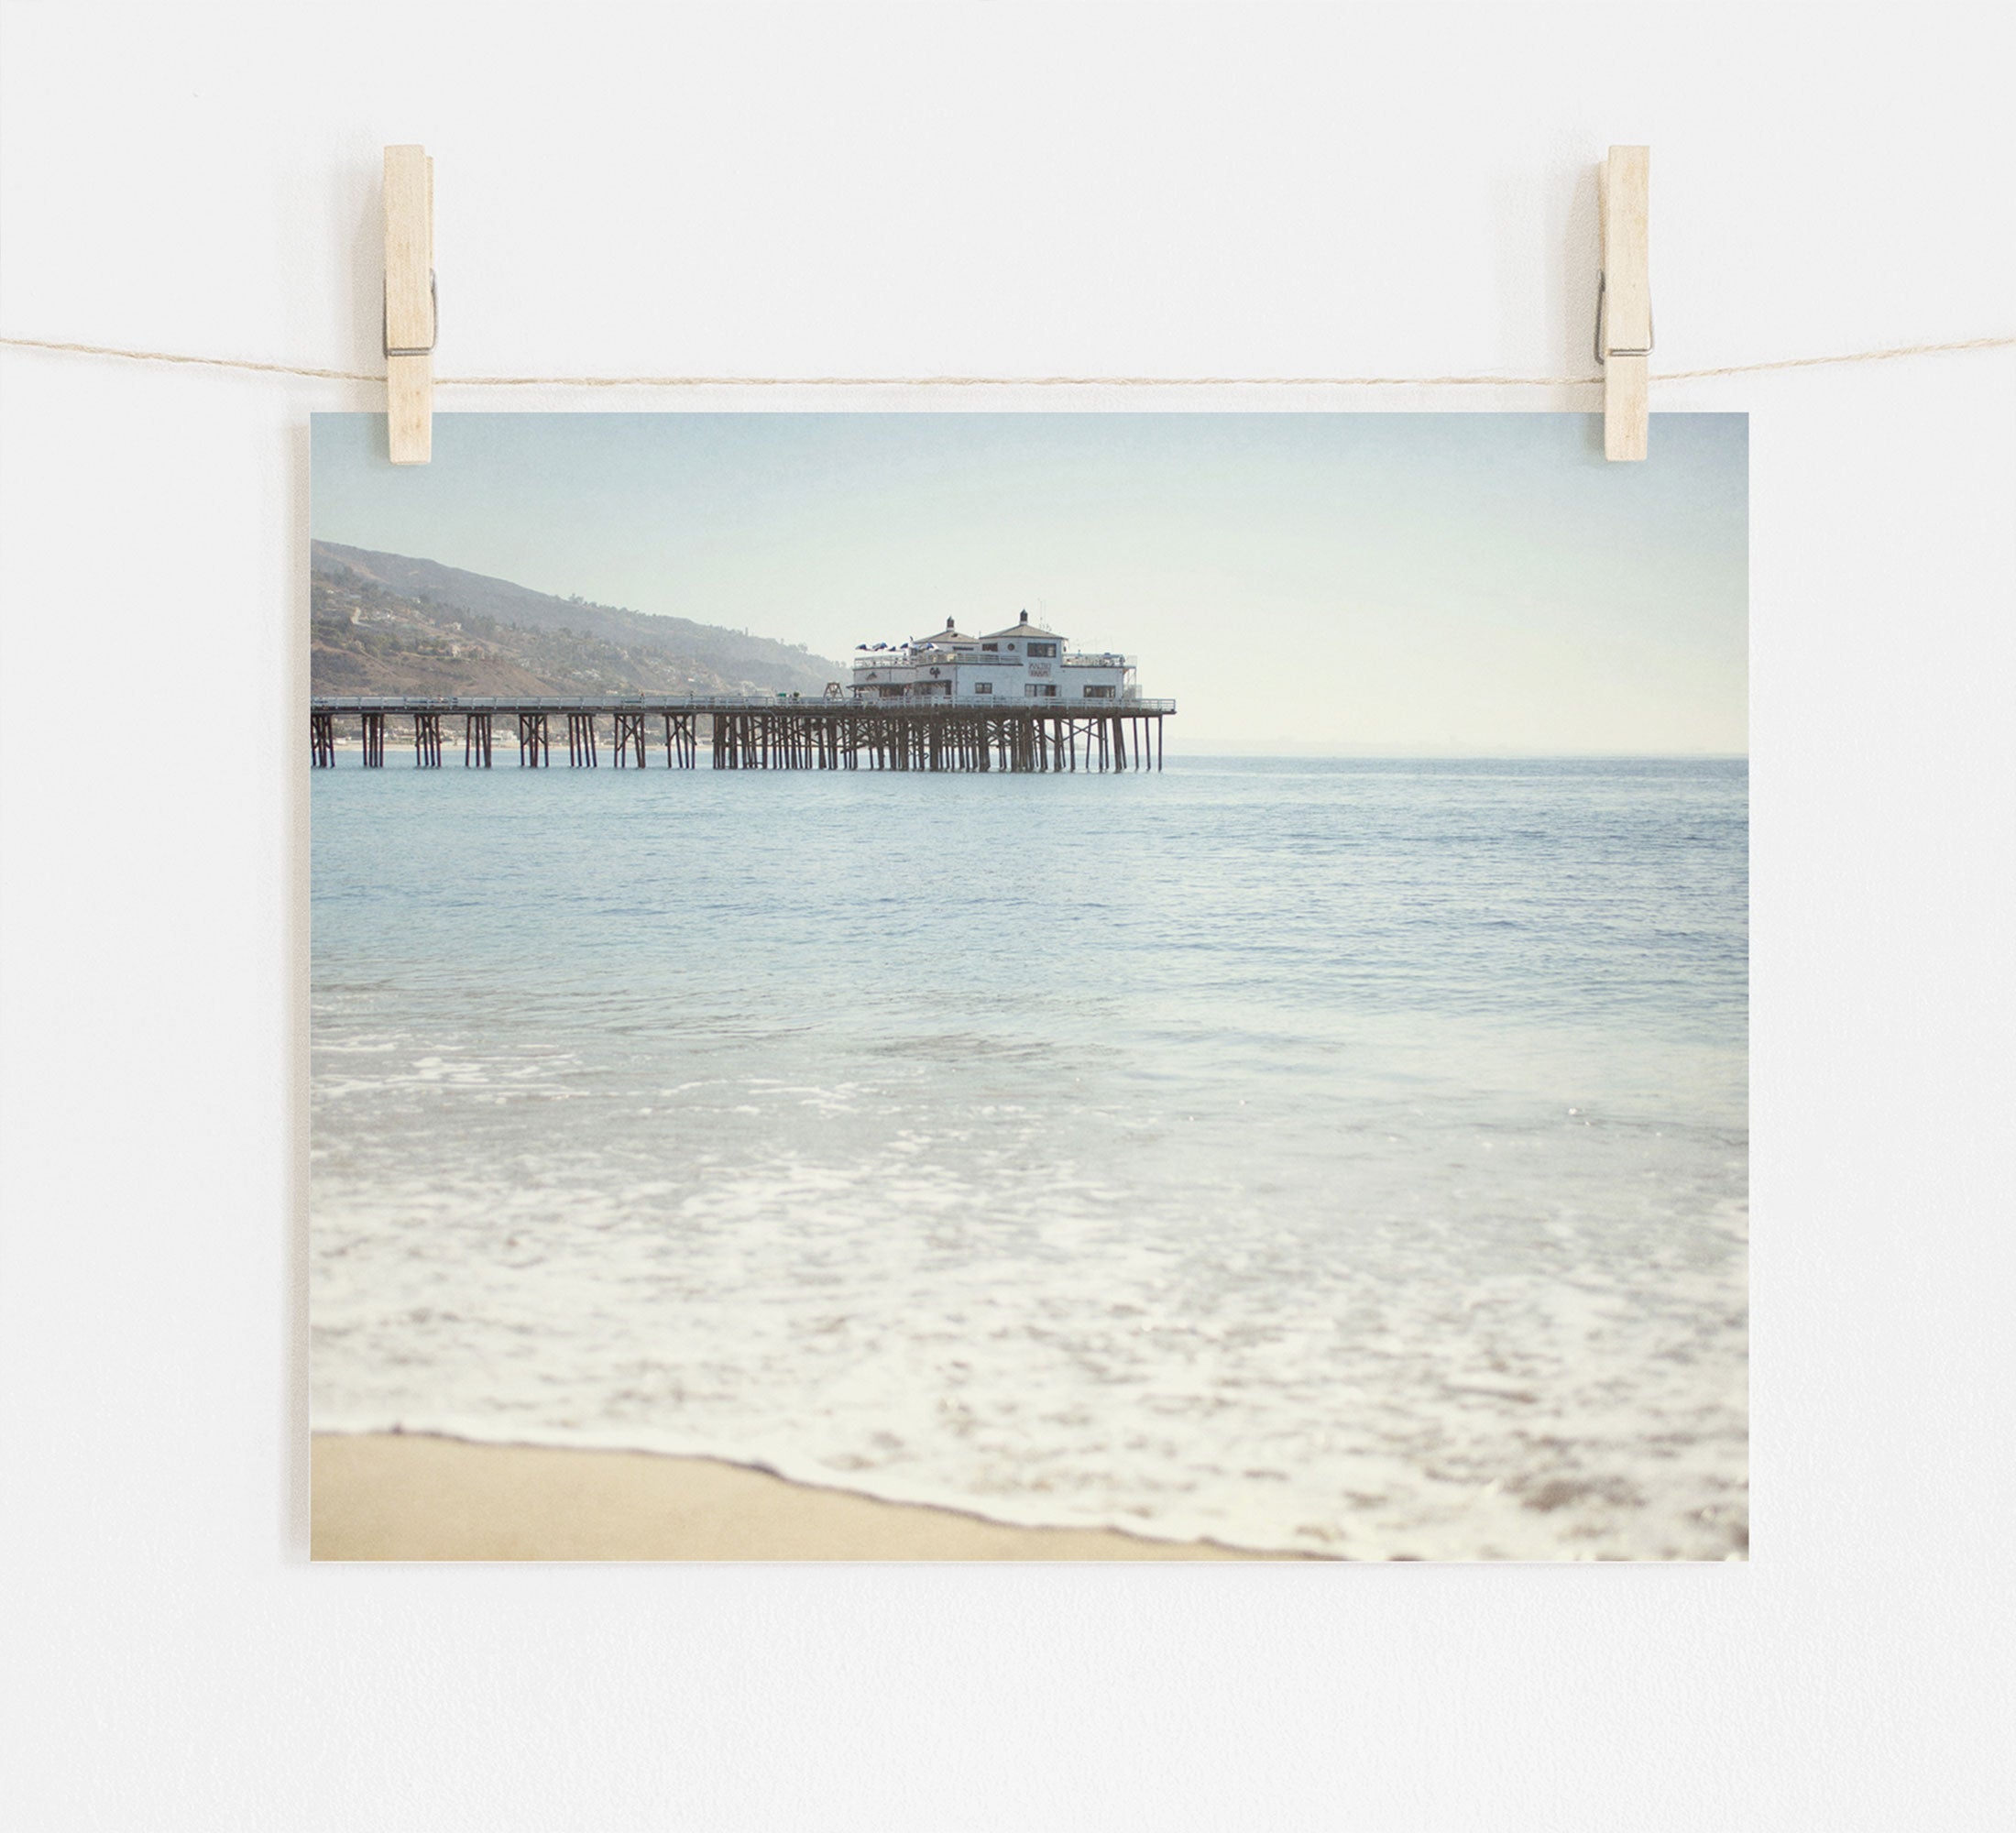 A photograph of Offley Green&#39;s &#39;Malibu Pier&#39; California Beach Print extending into the ocean, pinned by wooden clothespins onto a string against a white wall. The calm sea and clear sky create a serene backdrop.